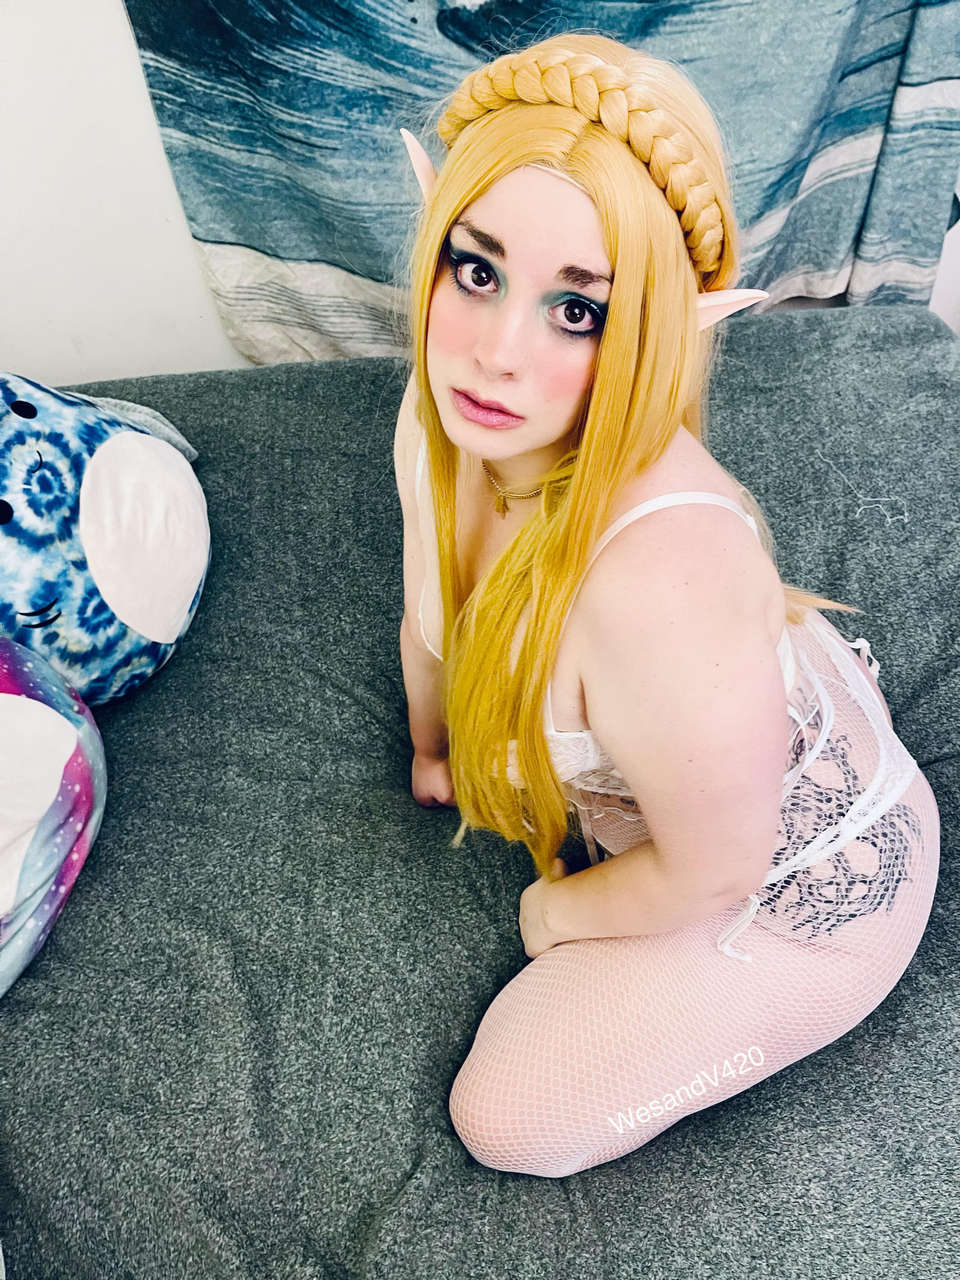 Ill Send You Nudes If My Thicc Princess Zelda Body Turns You O